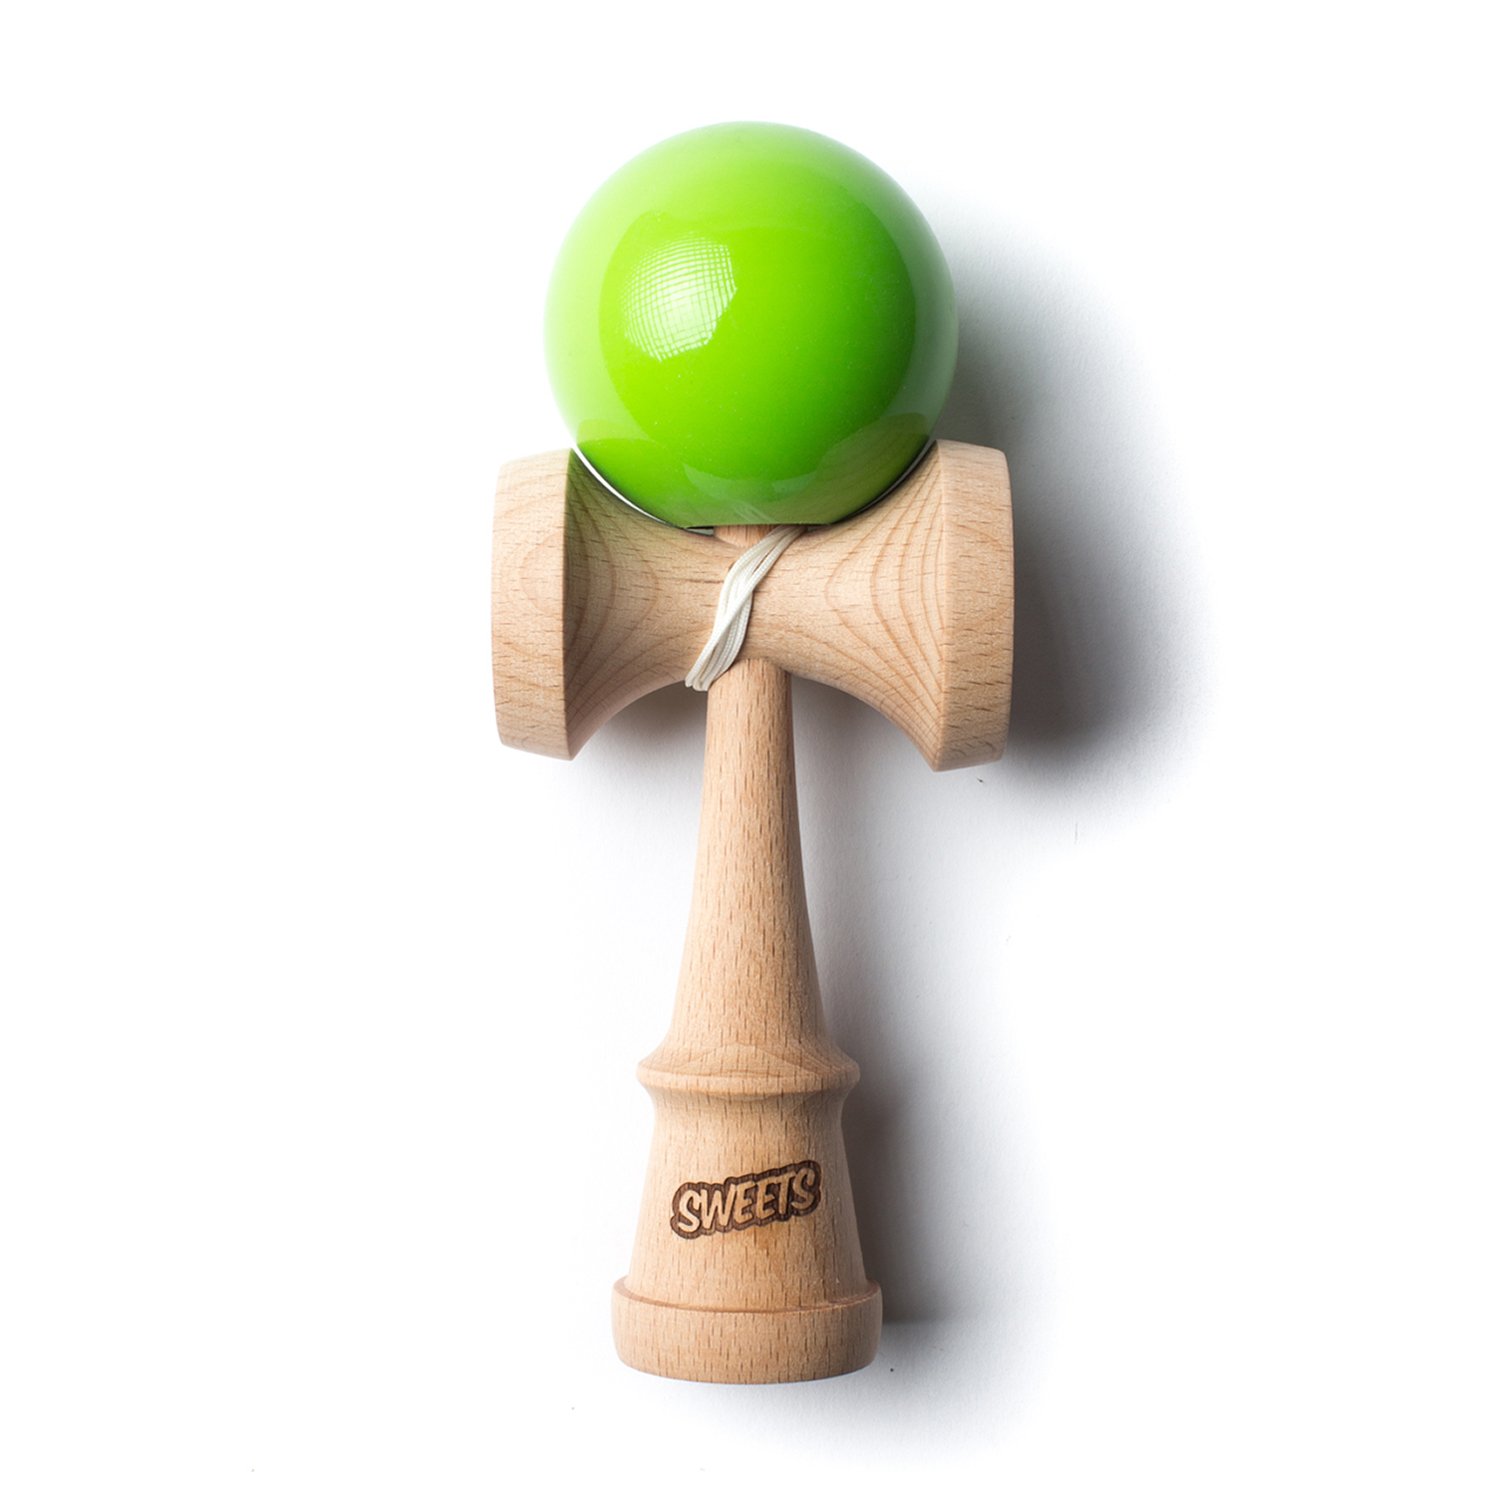 Sweets Kendamas Prime Solid – Green Green